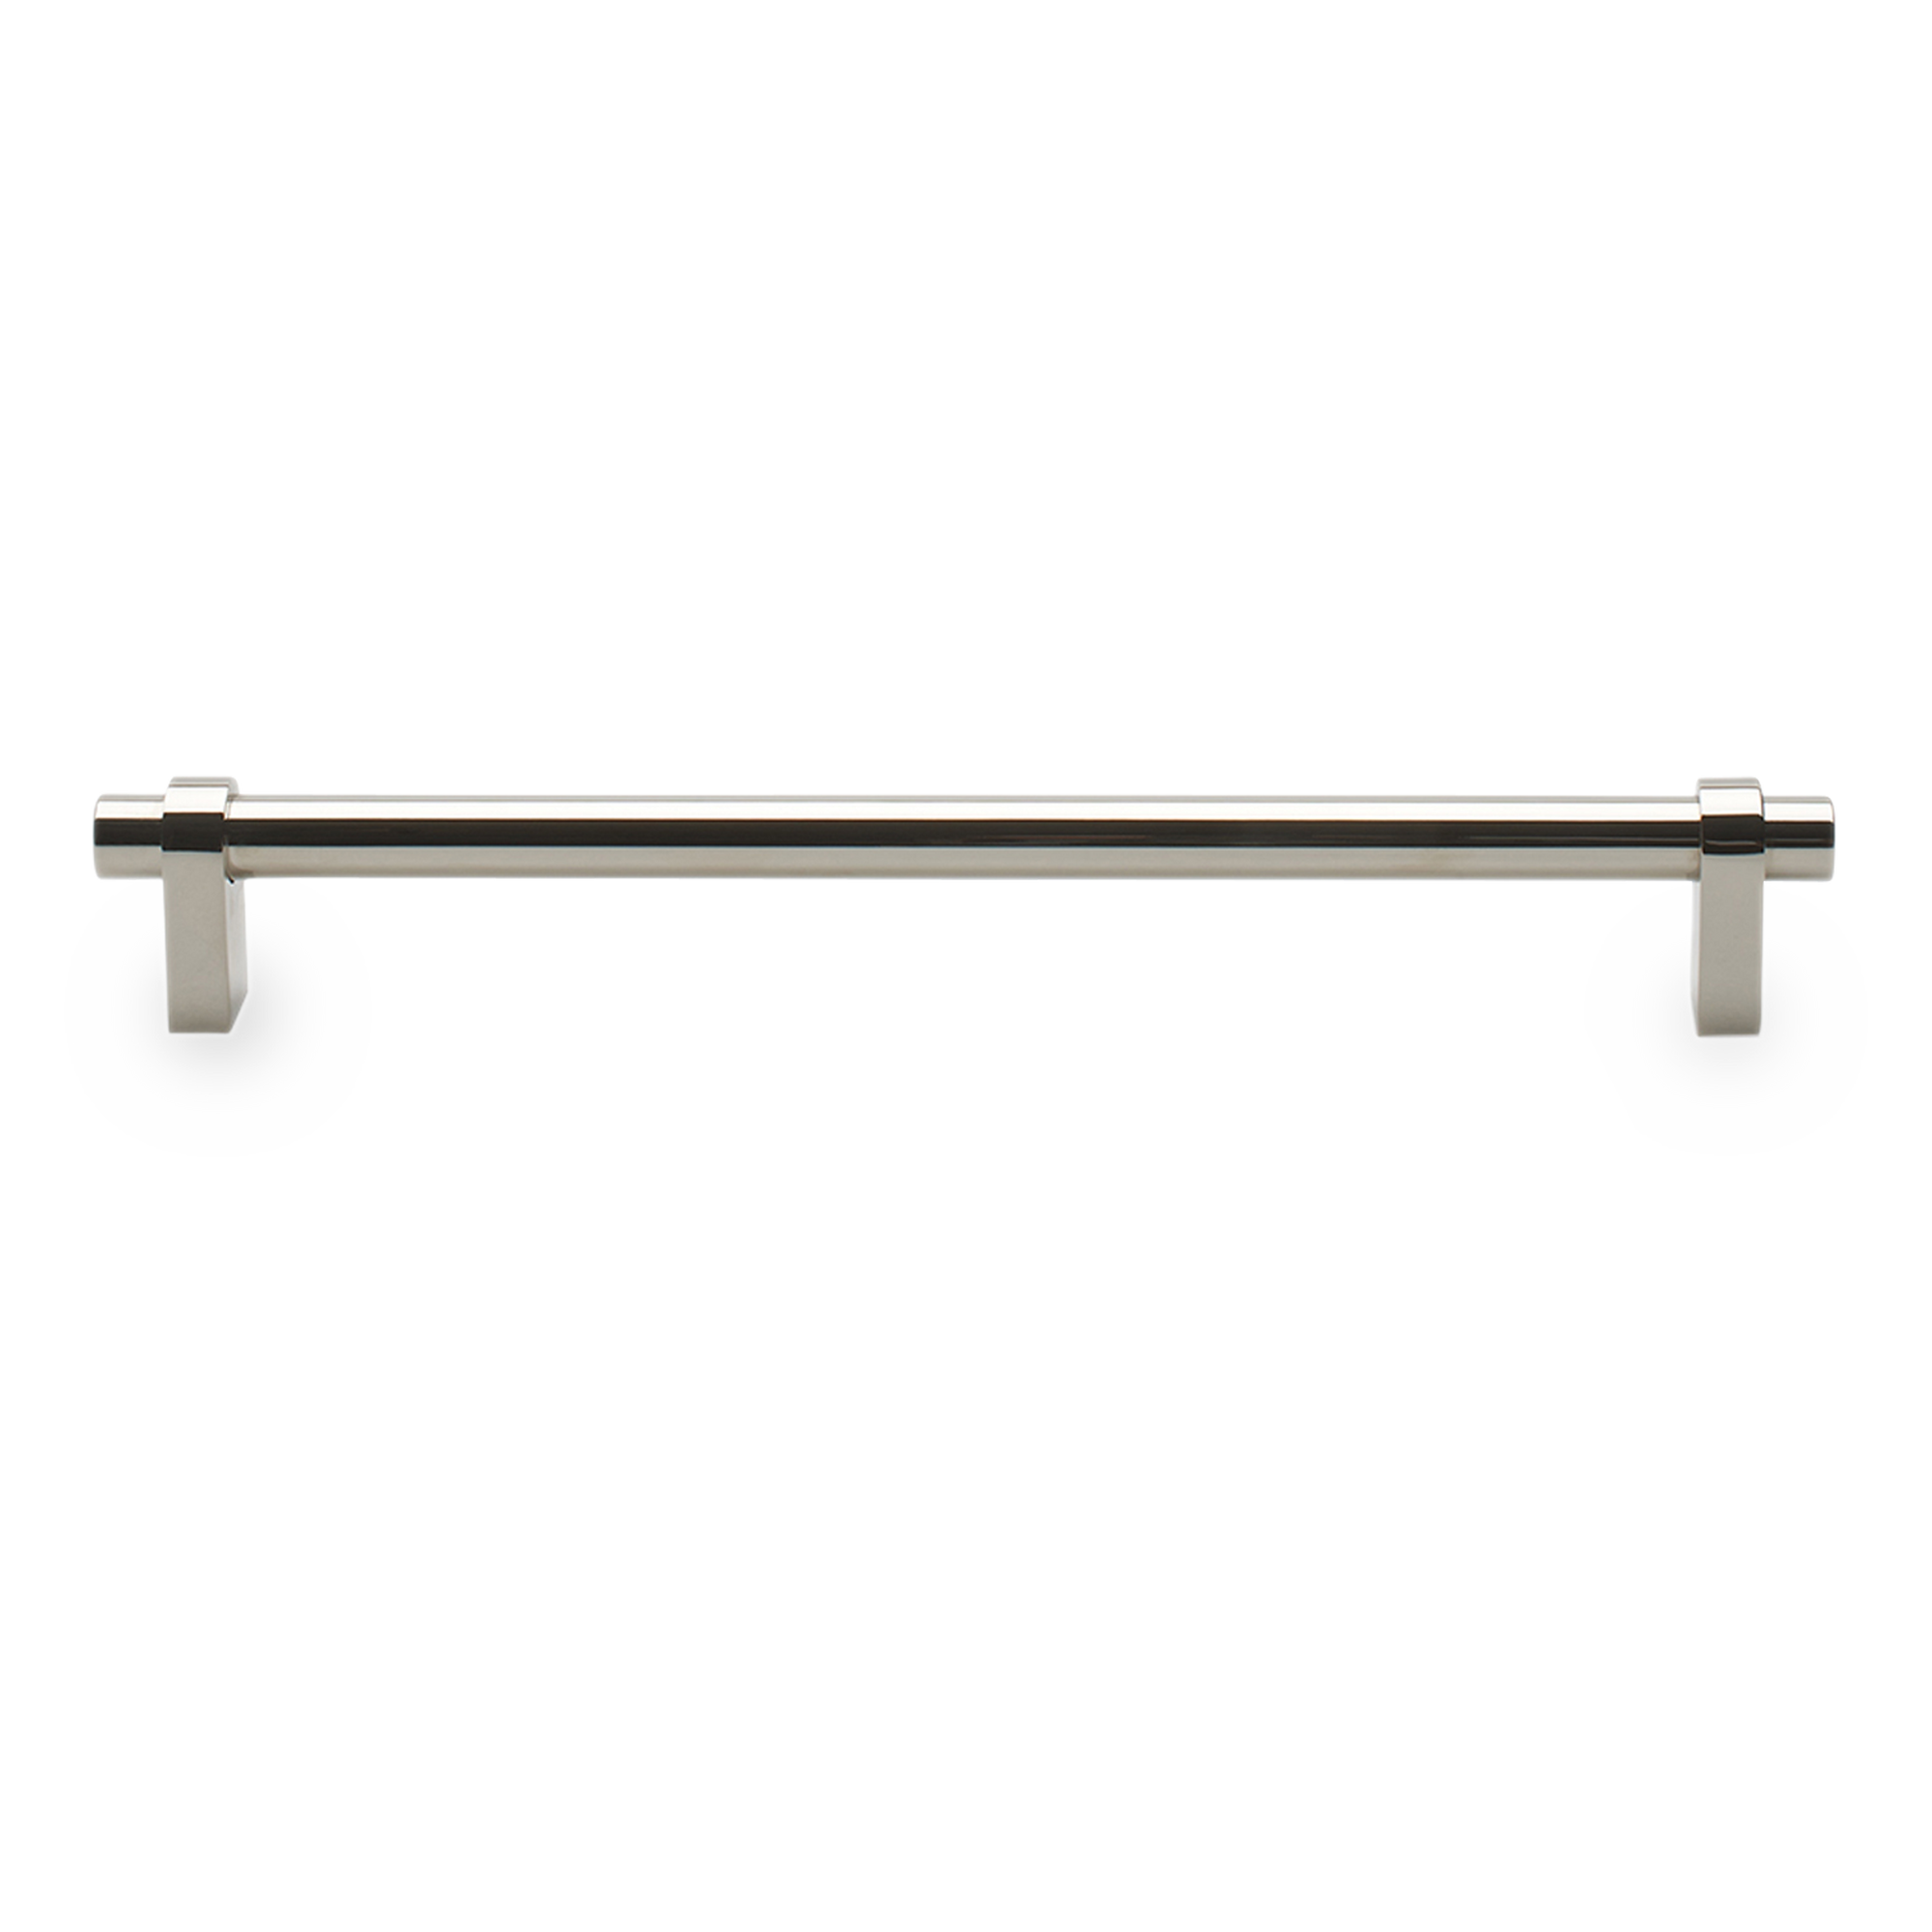 Pinnacle is a simple bar pull with a sophisticated sense of style and refinement.